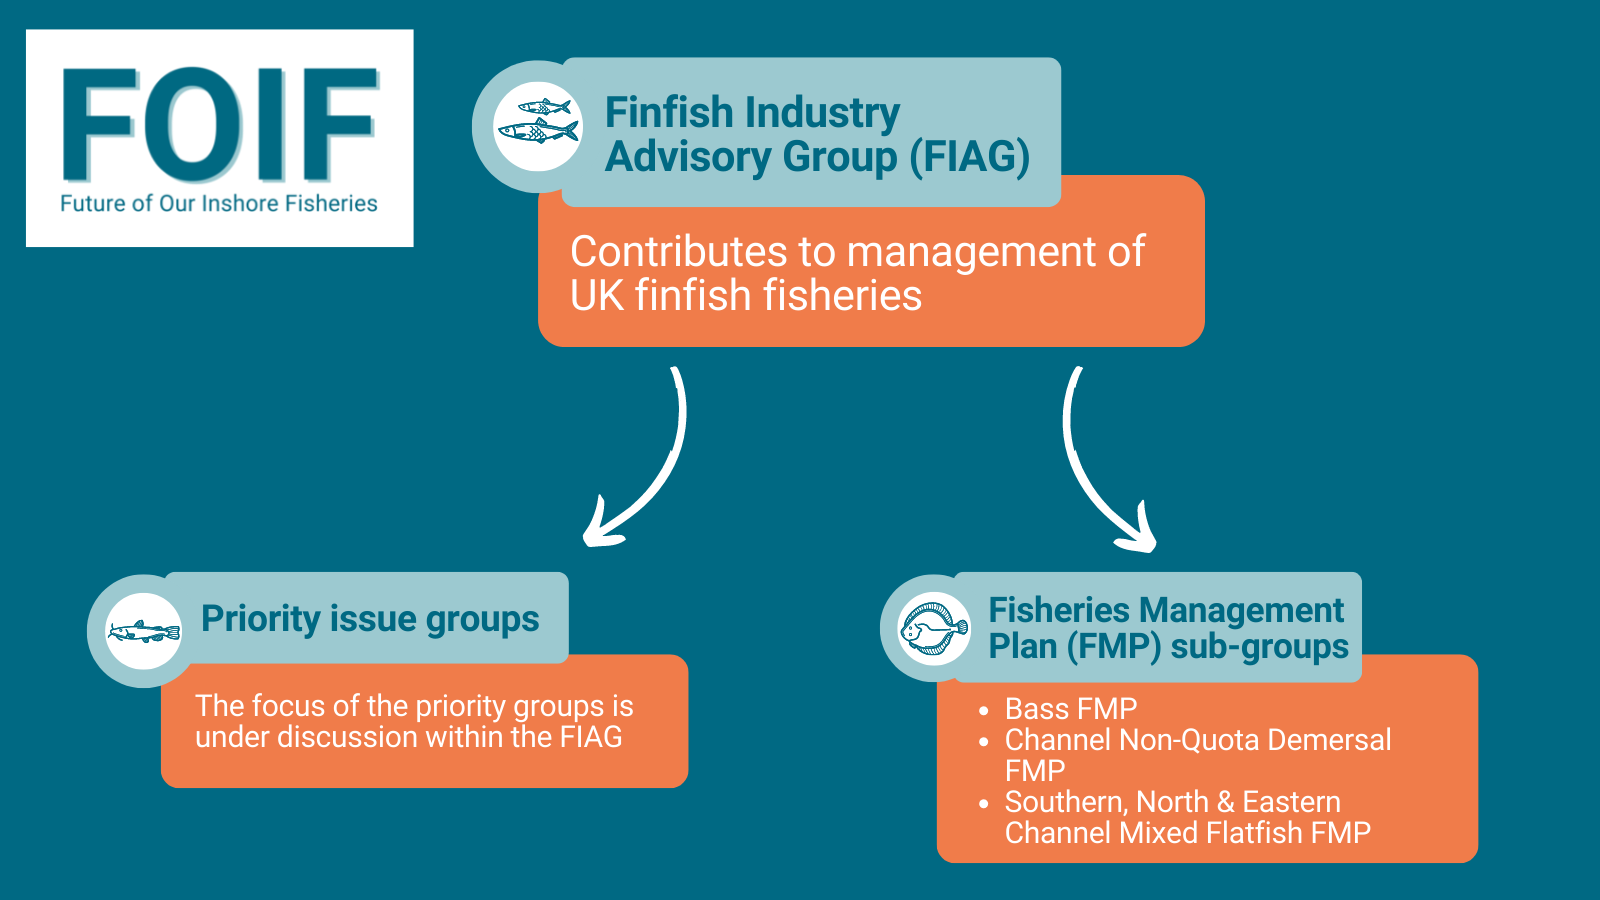 Infographic showing how the FIAF supports sub groups on priority issues and fisheries management plans